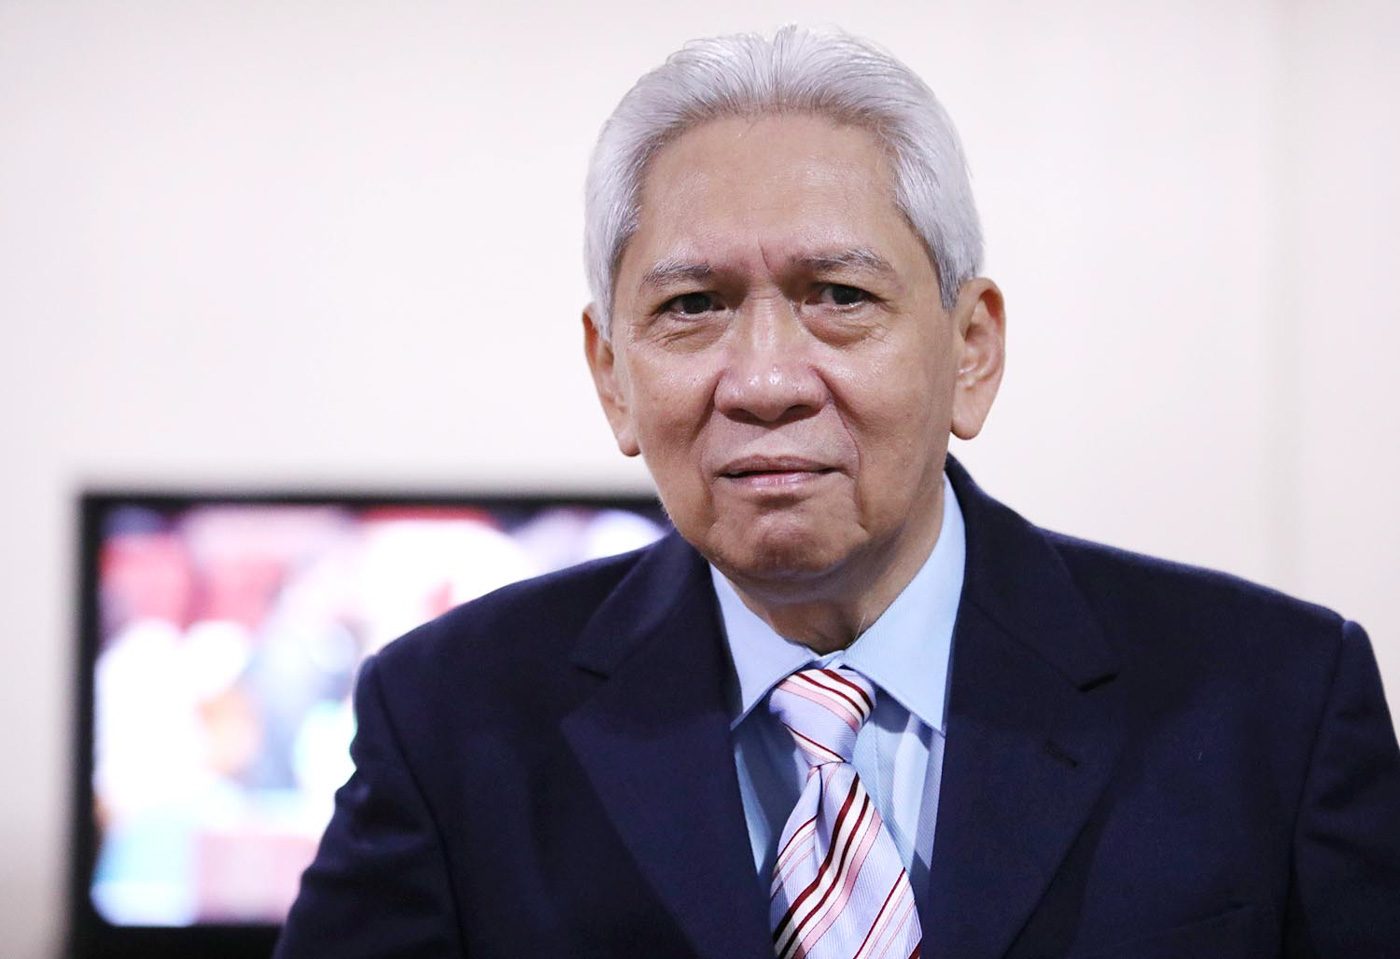 It’s the annual audit reports that should be private, Martires clarifies